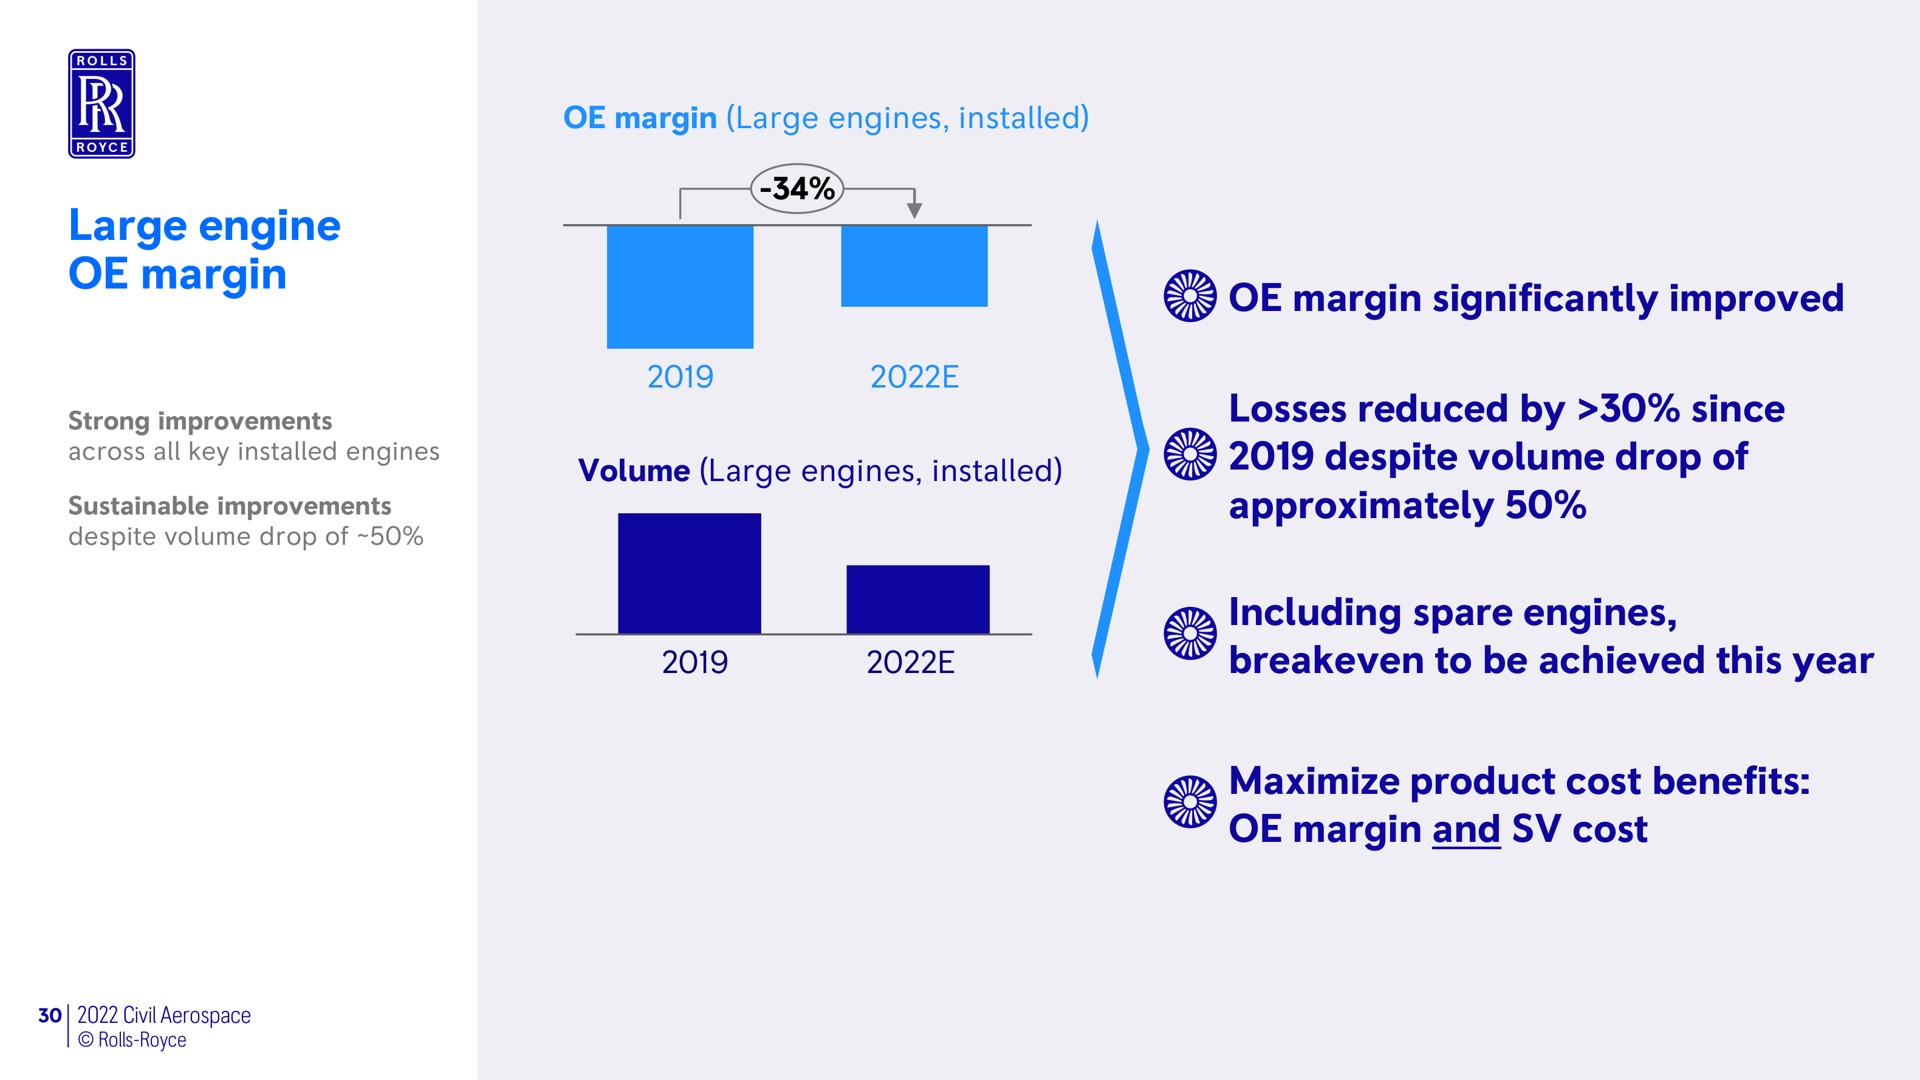 large engine margin margin significantly improved losses reduced by since despite volume drop of approximately including spare engines to be achieved this year maximize product cost benefits margin and cost | Rolls-Royce Holdings